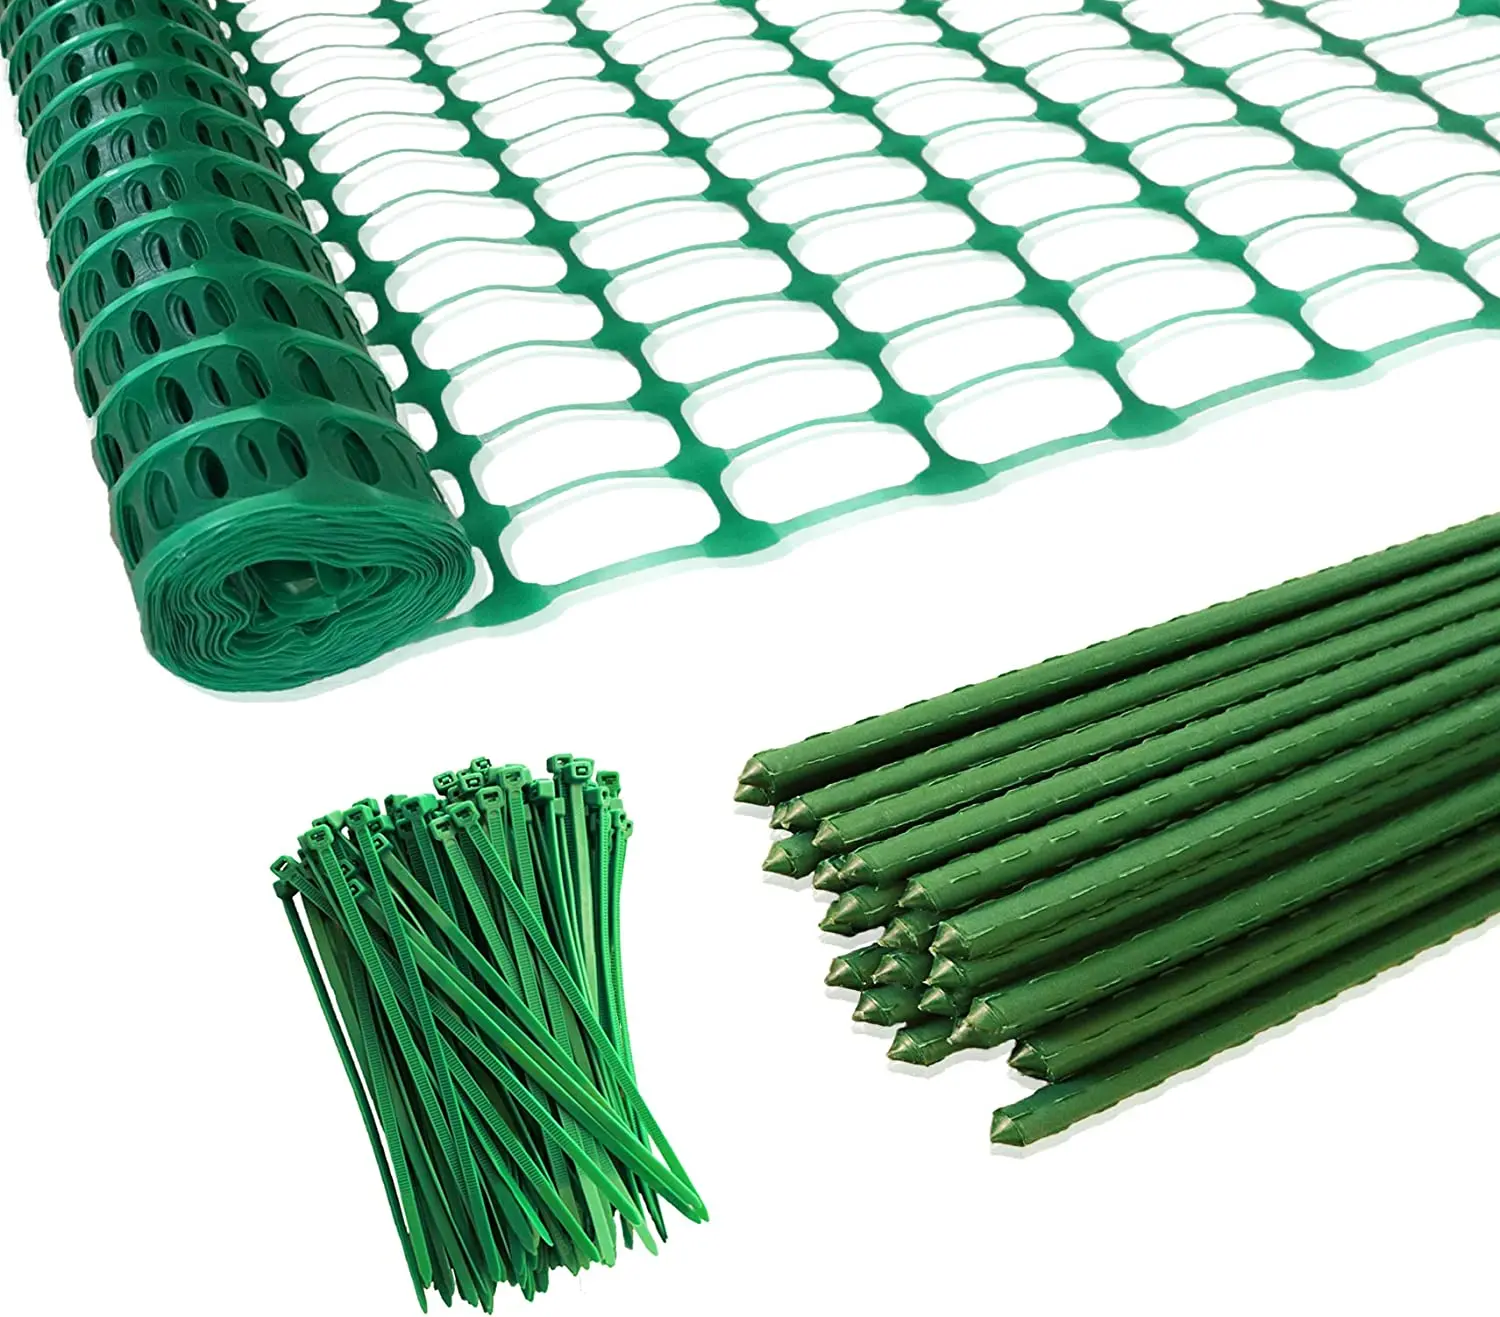 Plastic Safety Fence 4’ x100’ with Steel Plant Stakes& Zip Ties Plastic Netting Mesh Barrier for Dogs Plants Garden Fence 